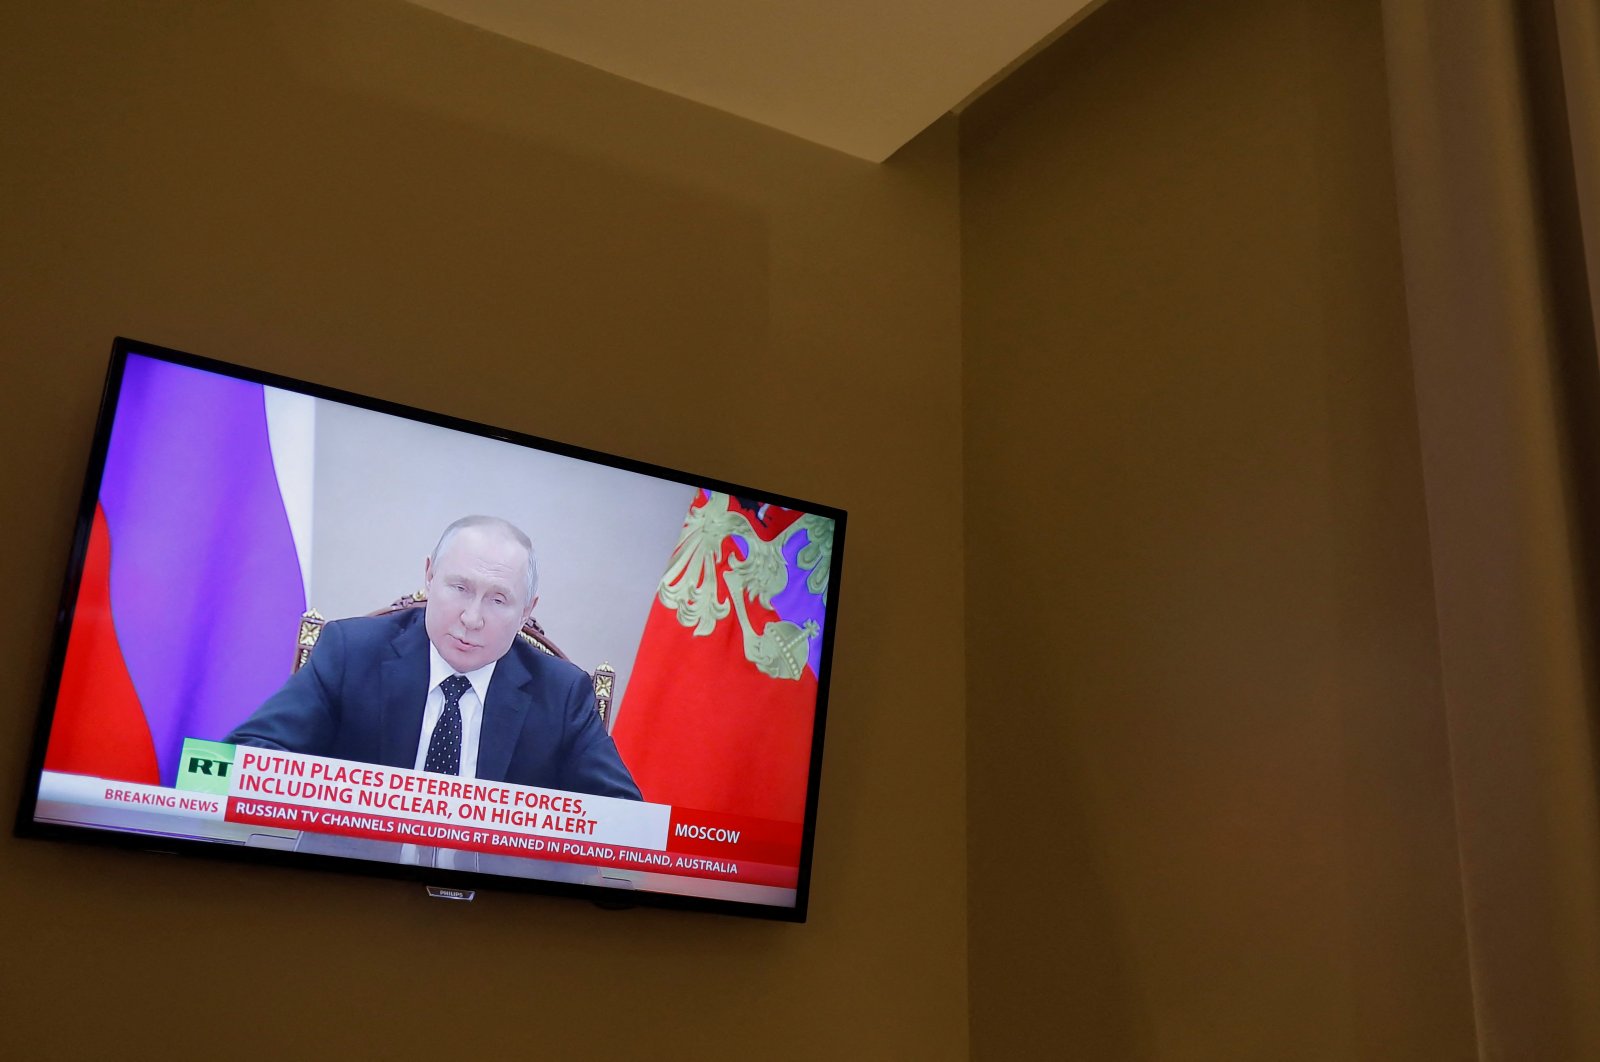 Russian President Vladimir Putin is seen on a TV screen in a hotel during a live news broadcast of the Russia Today (RT) channel TV, after Russia launched a massive military operation against Ukraine, Madrid, Spain, Feb. 27, 2022. (Reuters Photo)